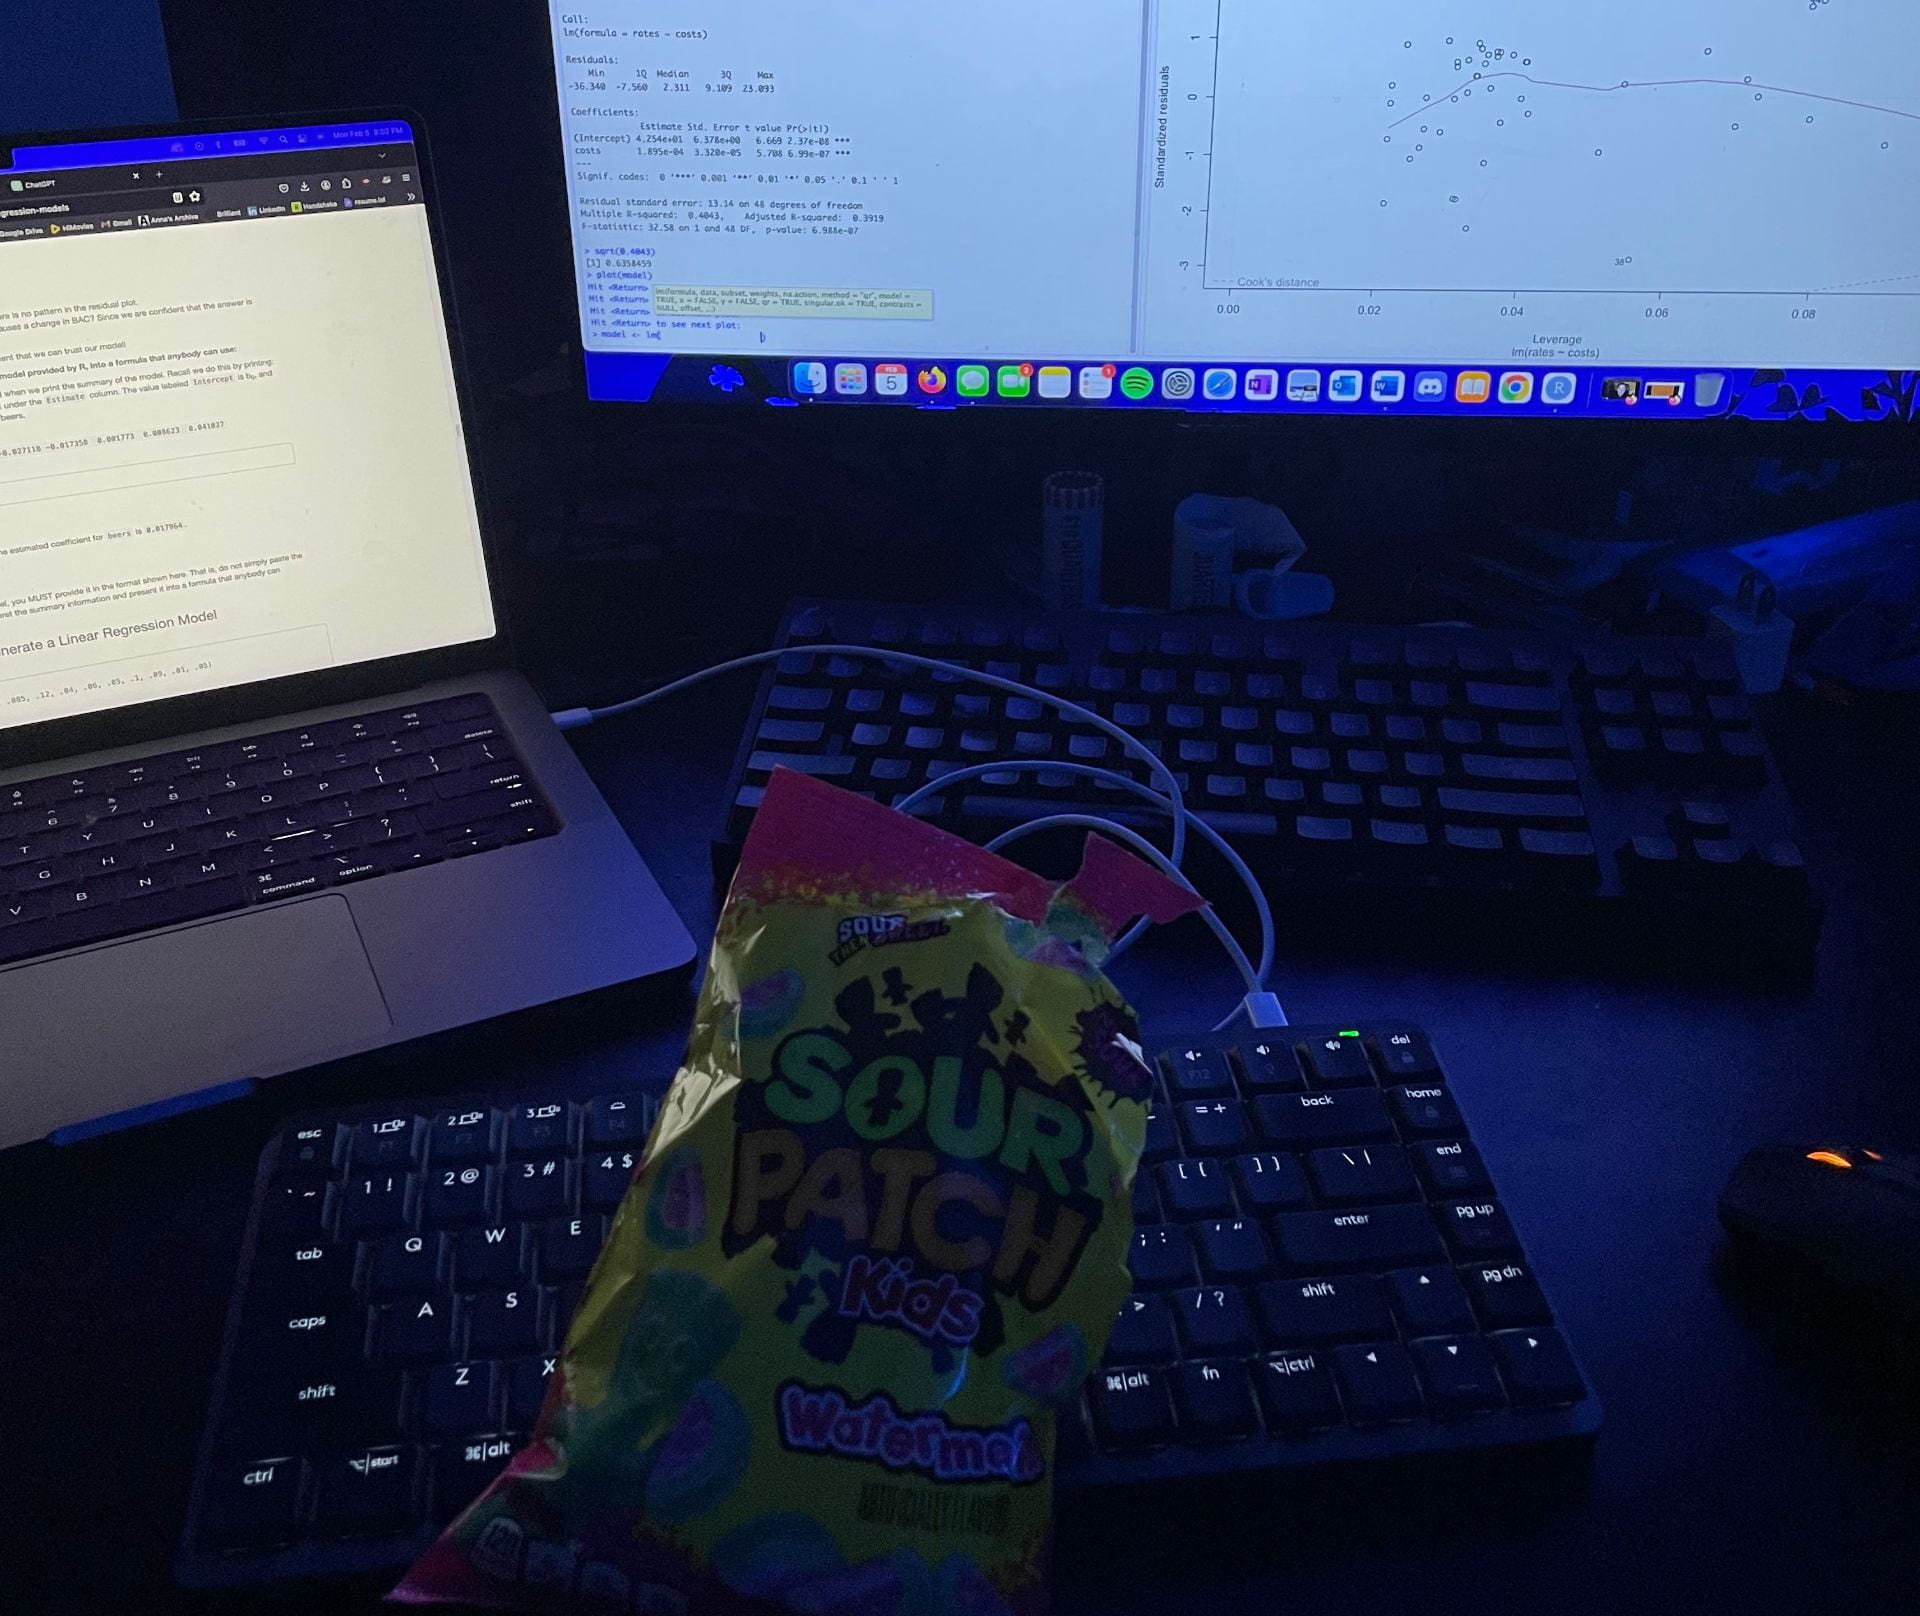 A photo of a bag of candy on top of a DePaul University student’s keyboard.